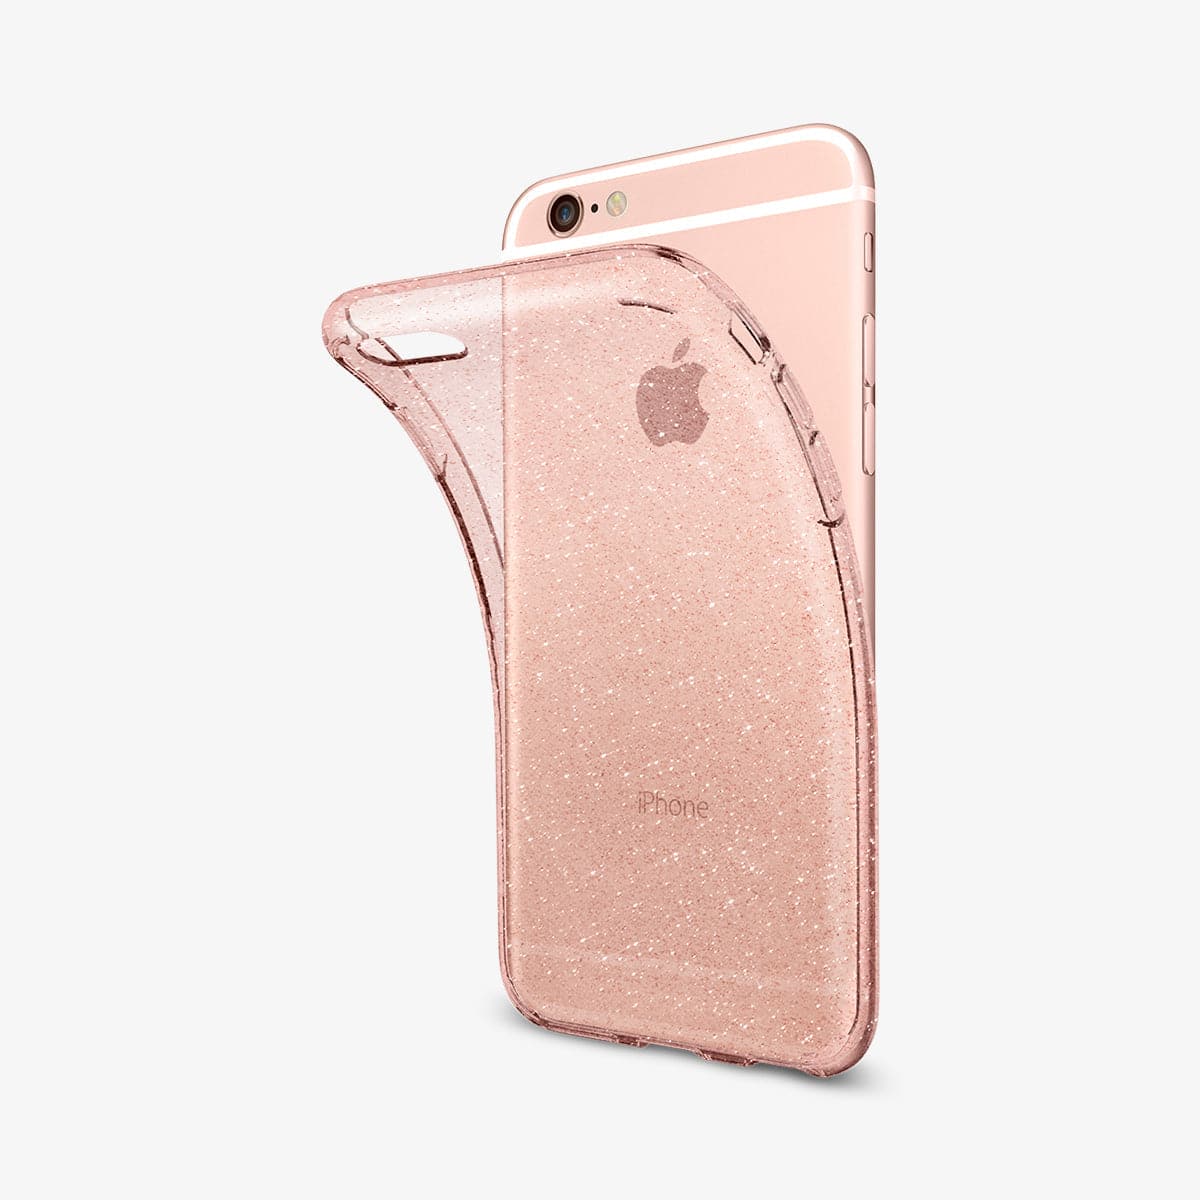 035CS21416 - iPhone 6 Series Liquid Crystal Glitter Case in rose quartz showing the back and side with case bending away from the device